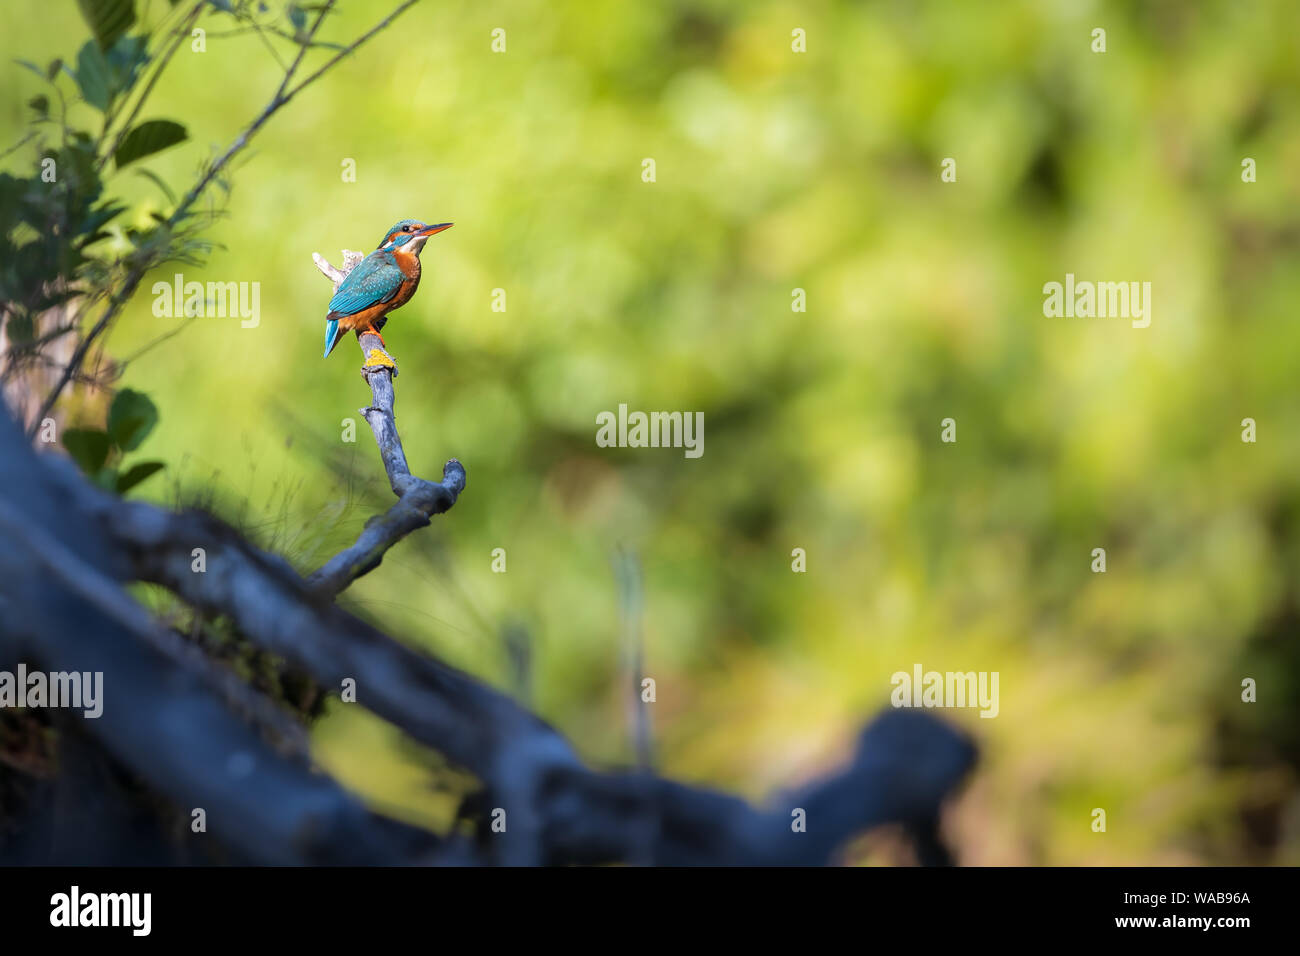 Kingfisher alcedo atthis perching on a branch in the middle of green foliage of its natural enviroment Stock Photo